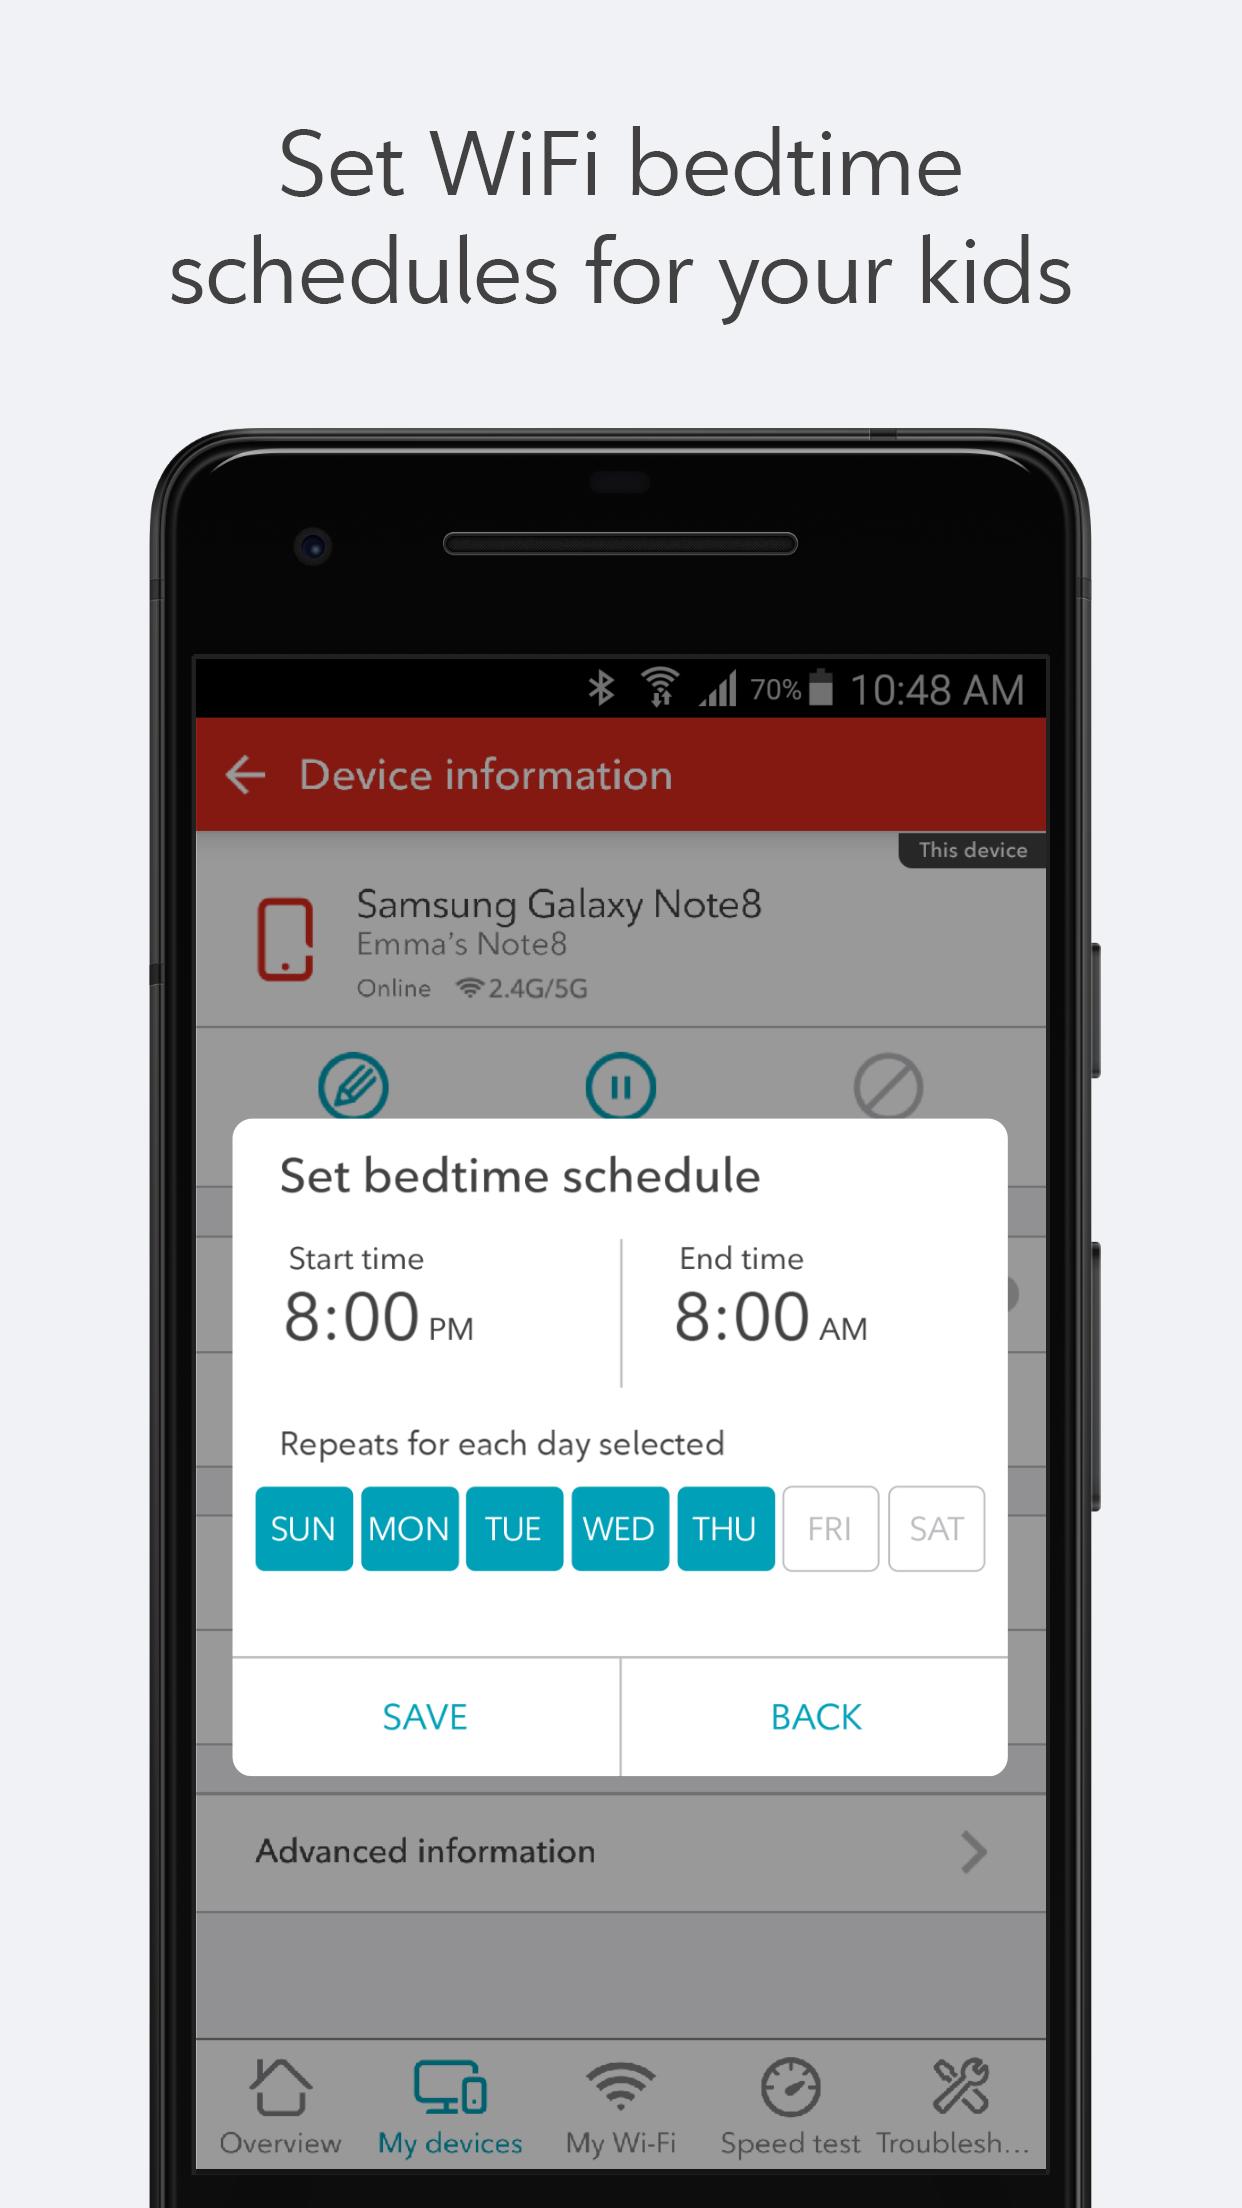 Rogers Mywifi (Early Access) Apk 1.9.28 For Android – Download Rogers Mywifi  (Early Access) Apk Latest Version From Apkfab.Com